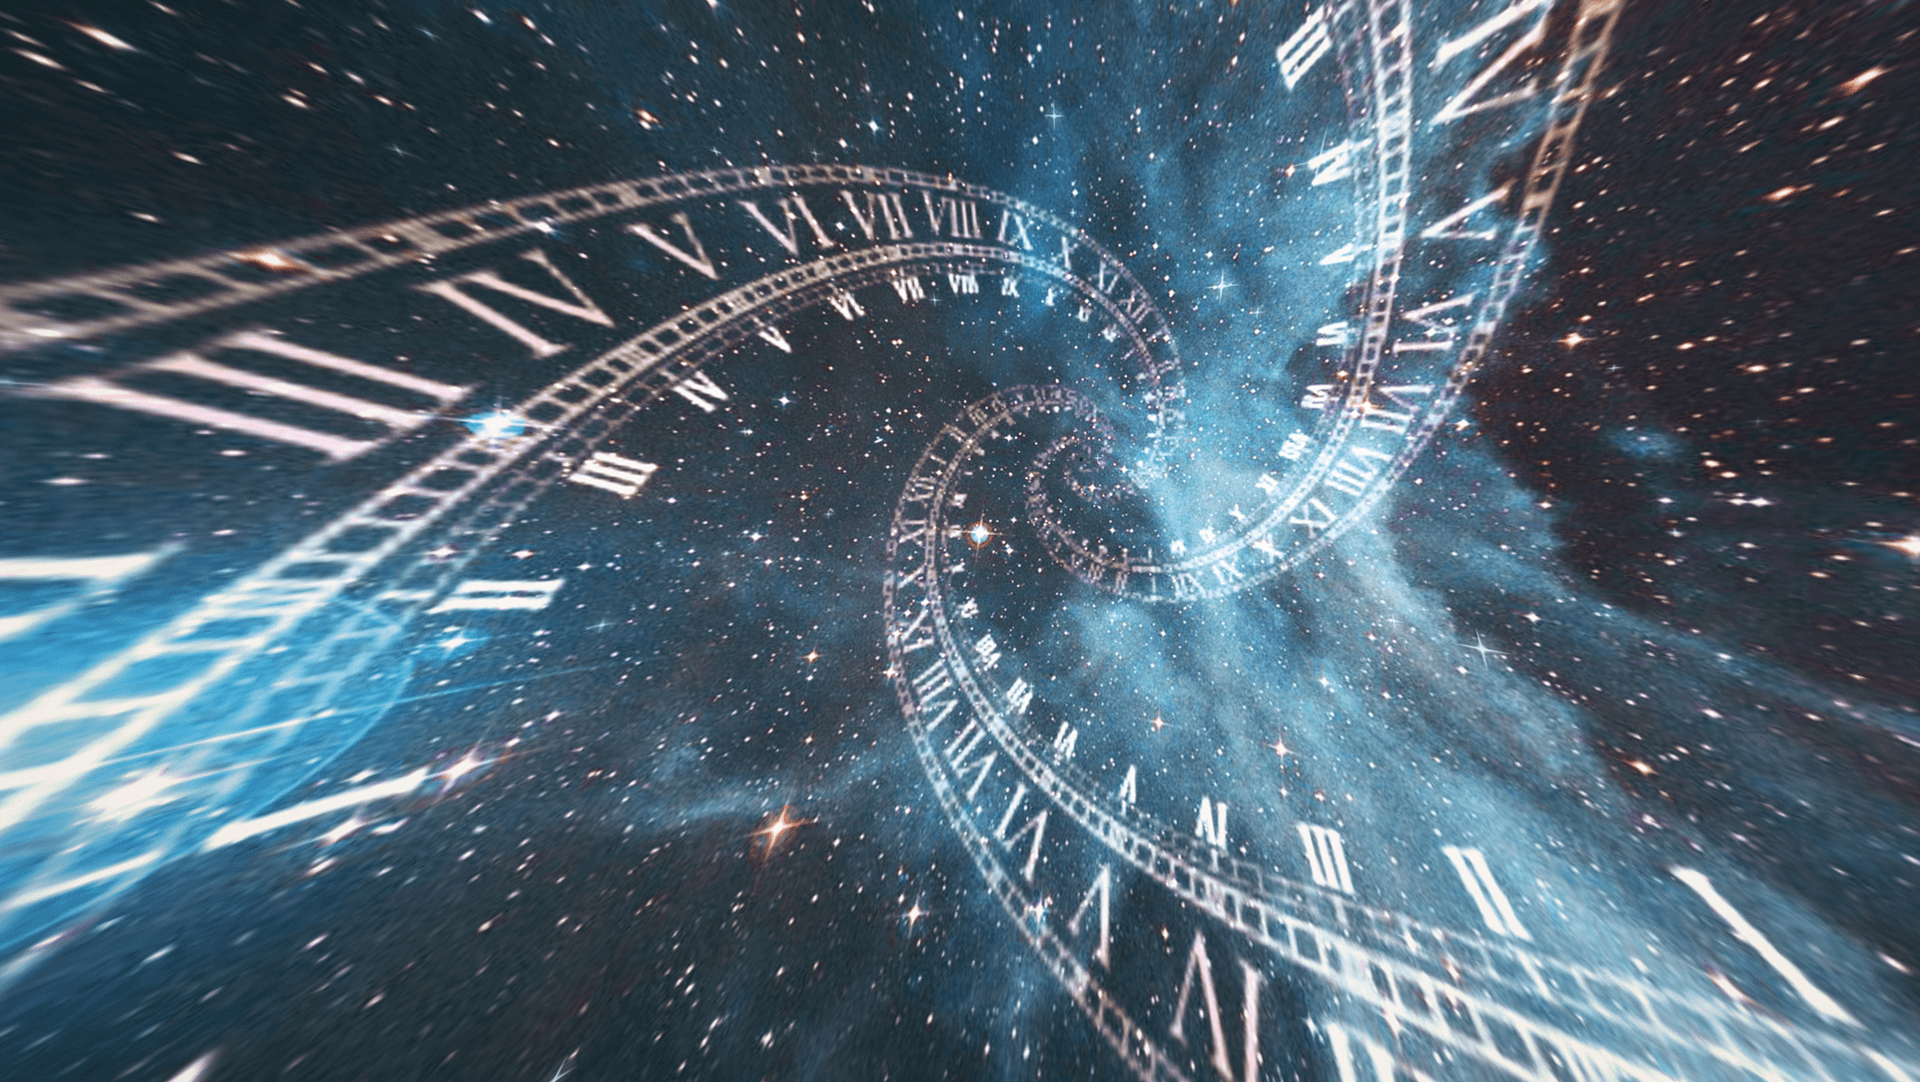 Time warp: a cosmic spiral of clock faces stretching into the infinity of space.